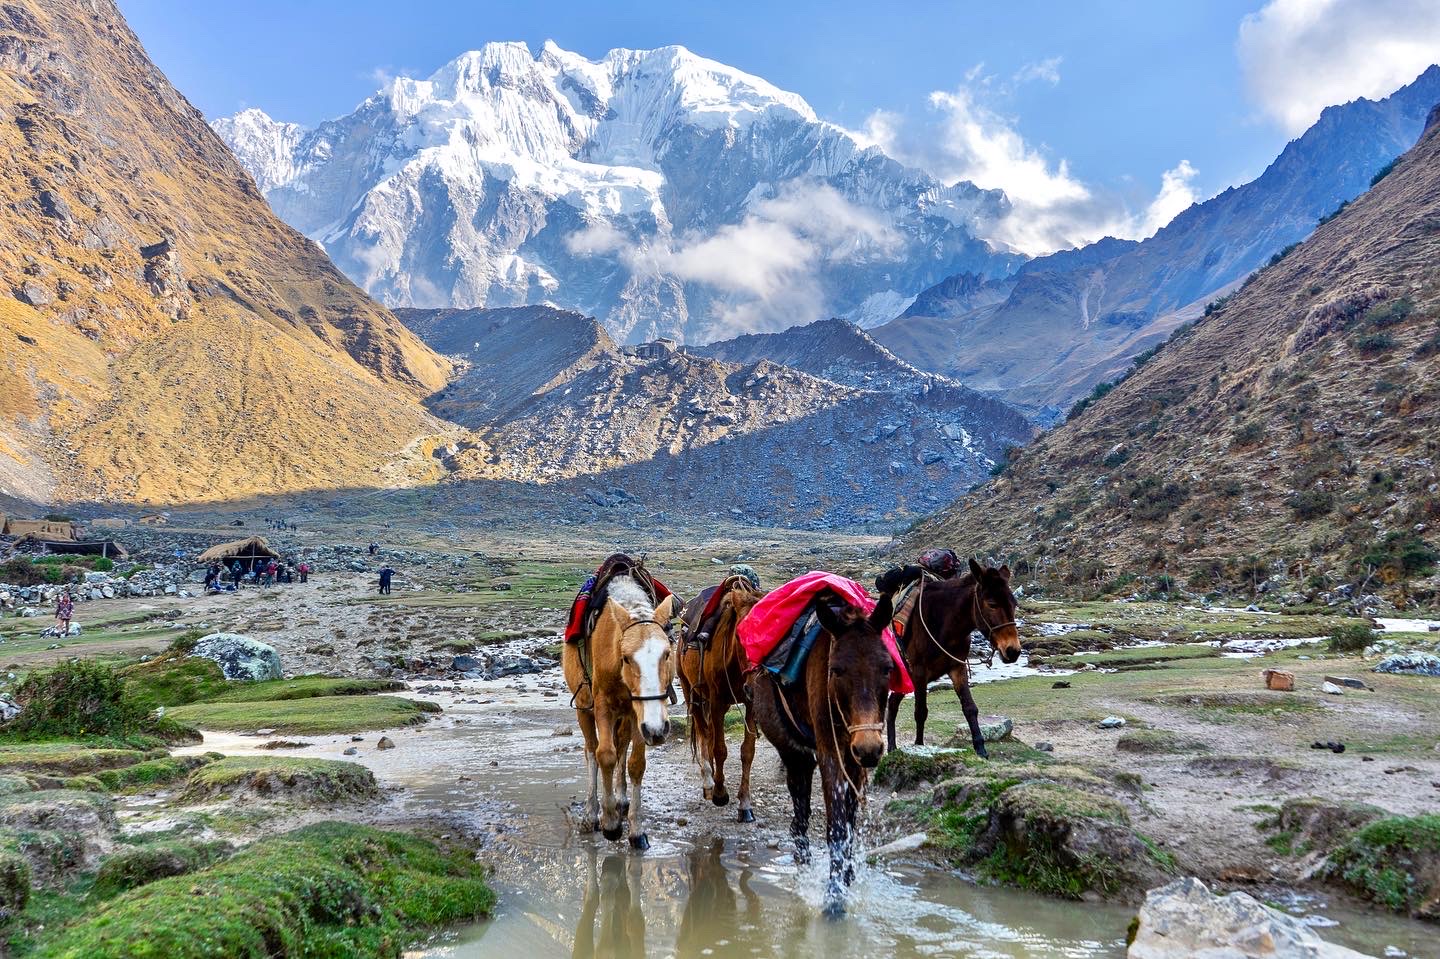 Stunning views on the Salkantay Trek without a guide